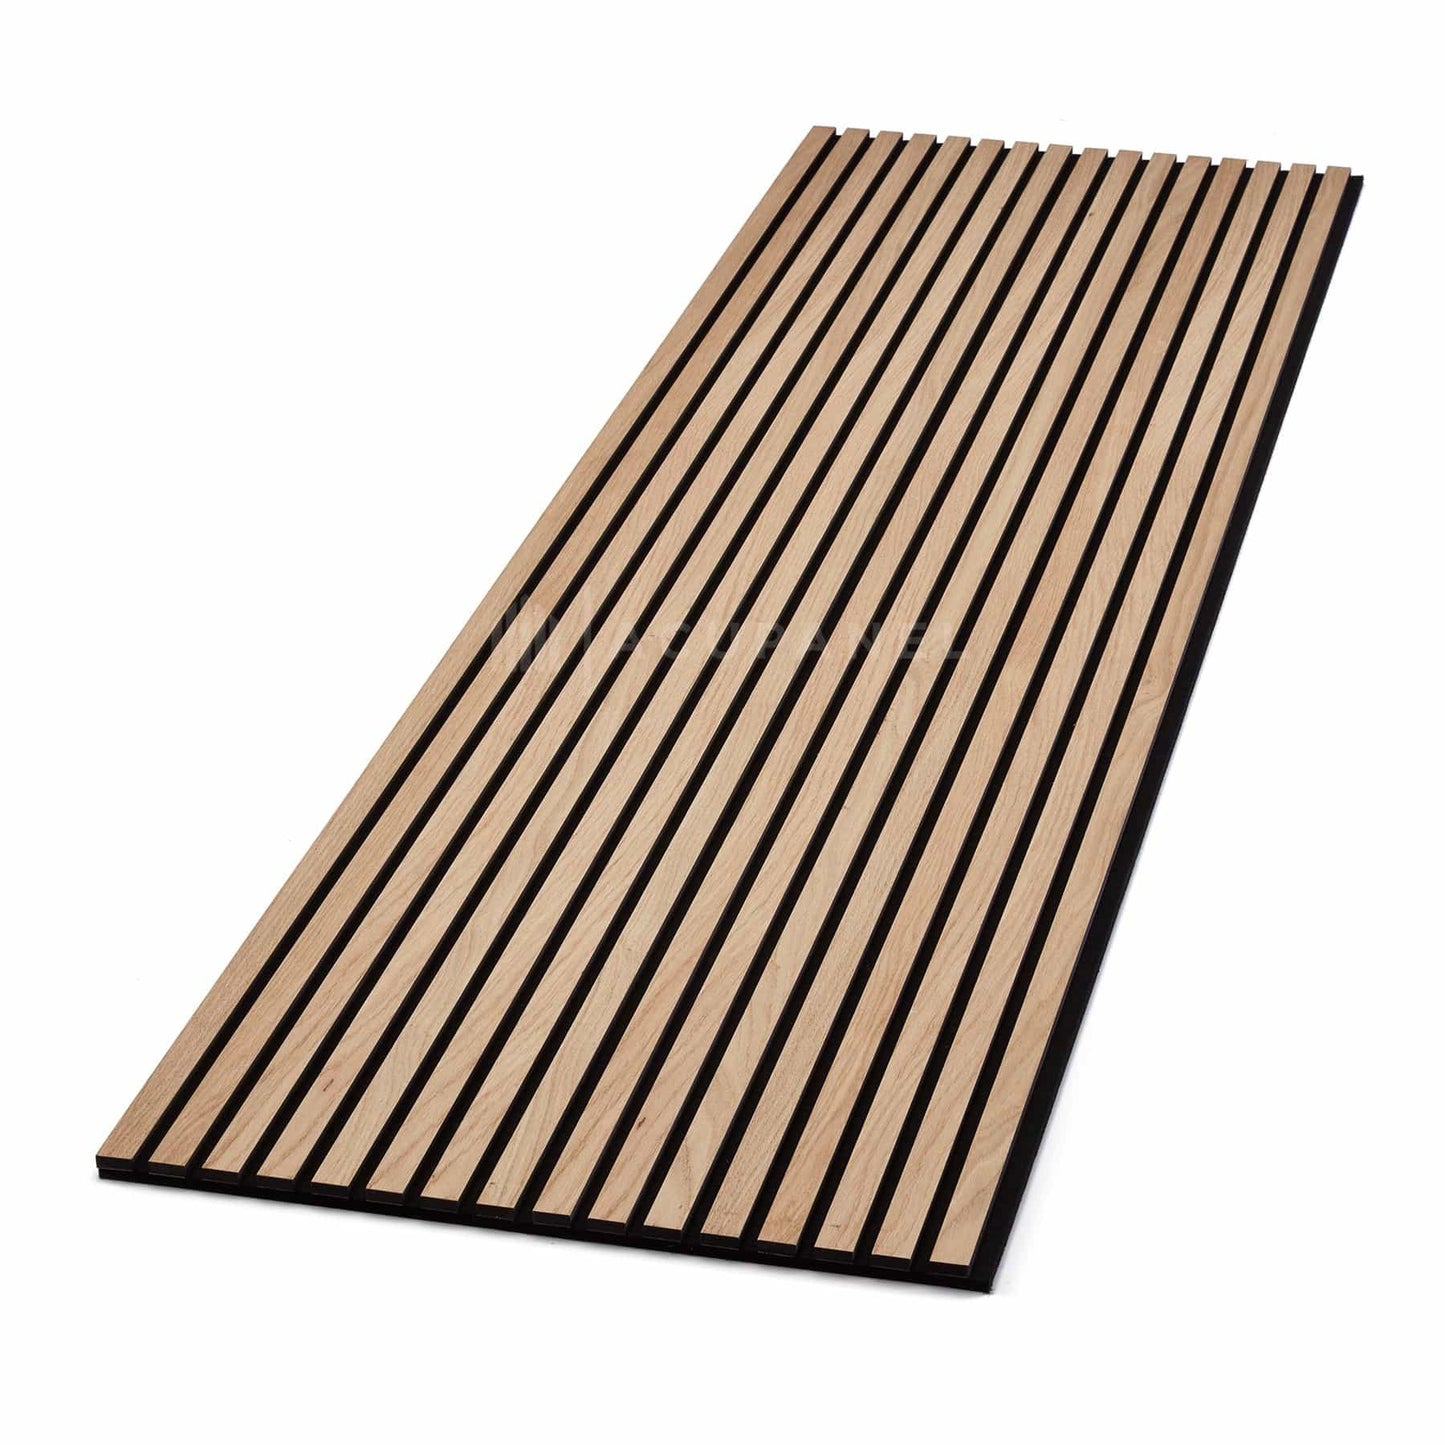 Acoustic Wood Slat Wall Panel by WPH® (2-Pack)